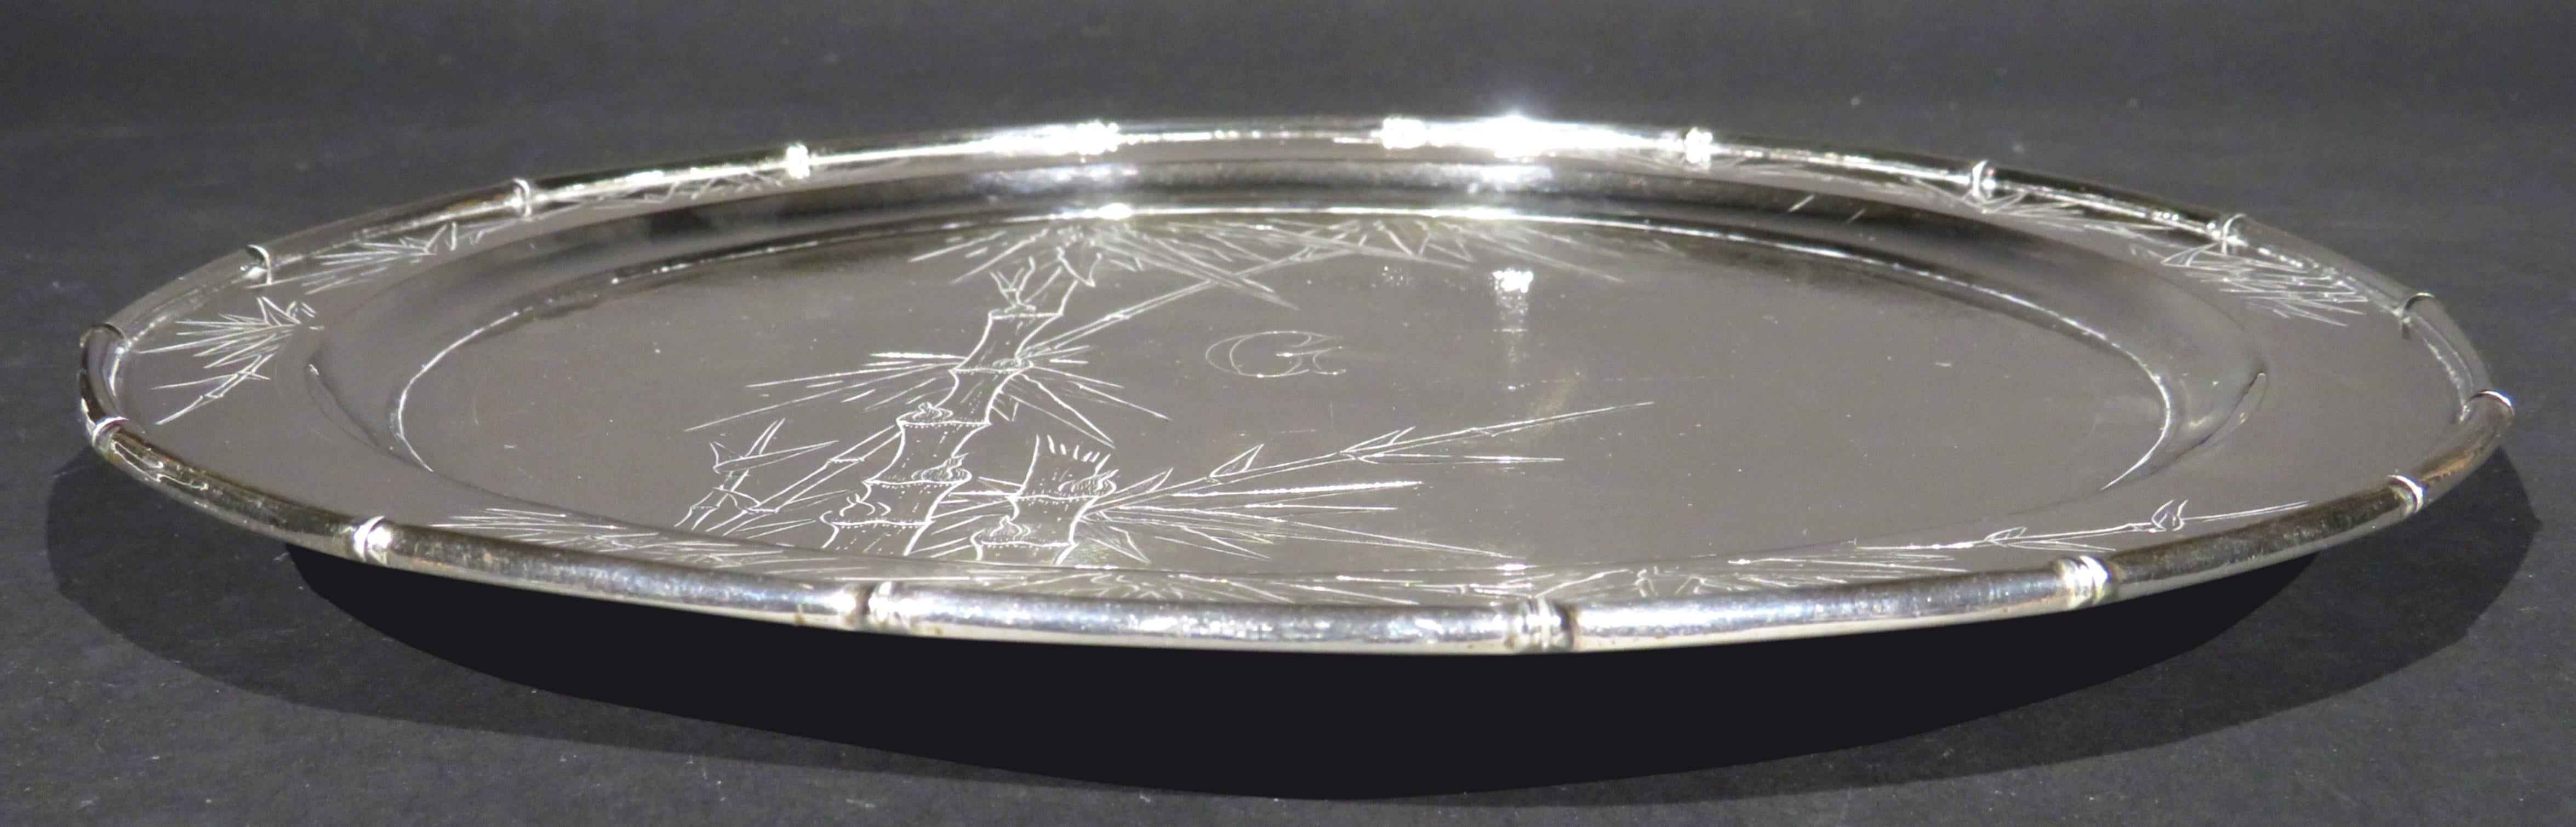 A fine & heavy early 20th century Chinese export silver circular tray / salver having a dished surface engraved with motifs of bamboo branches & foliage against a fine stippled field, rising to a similarly decorated rim with a conforming raised